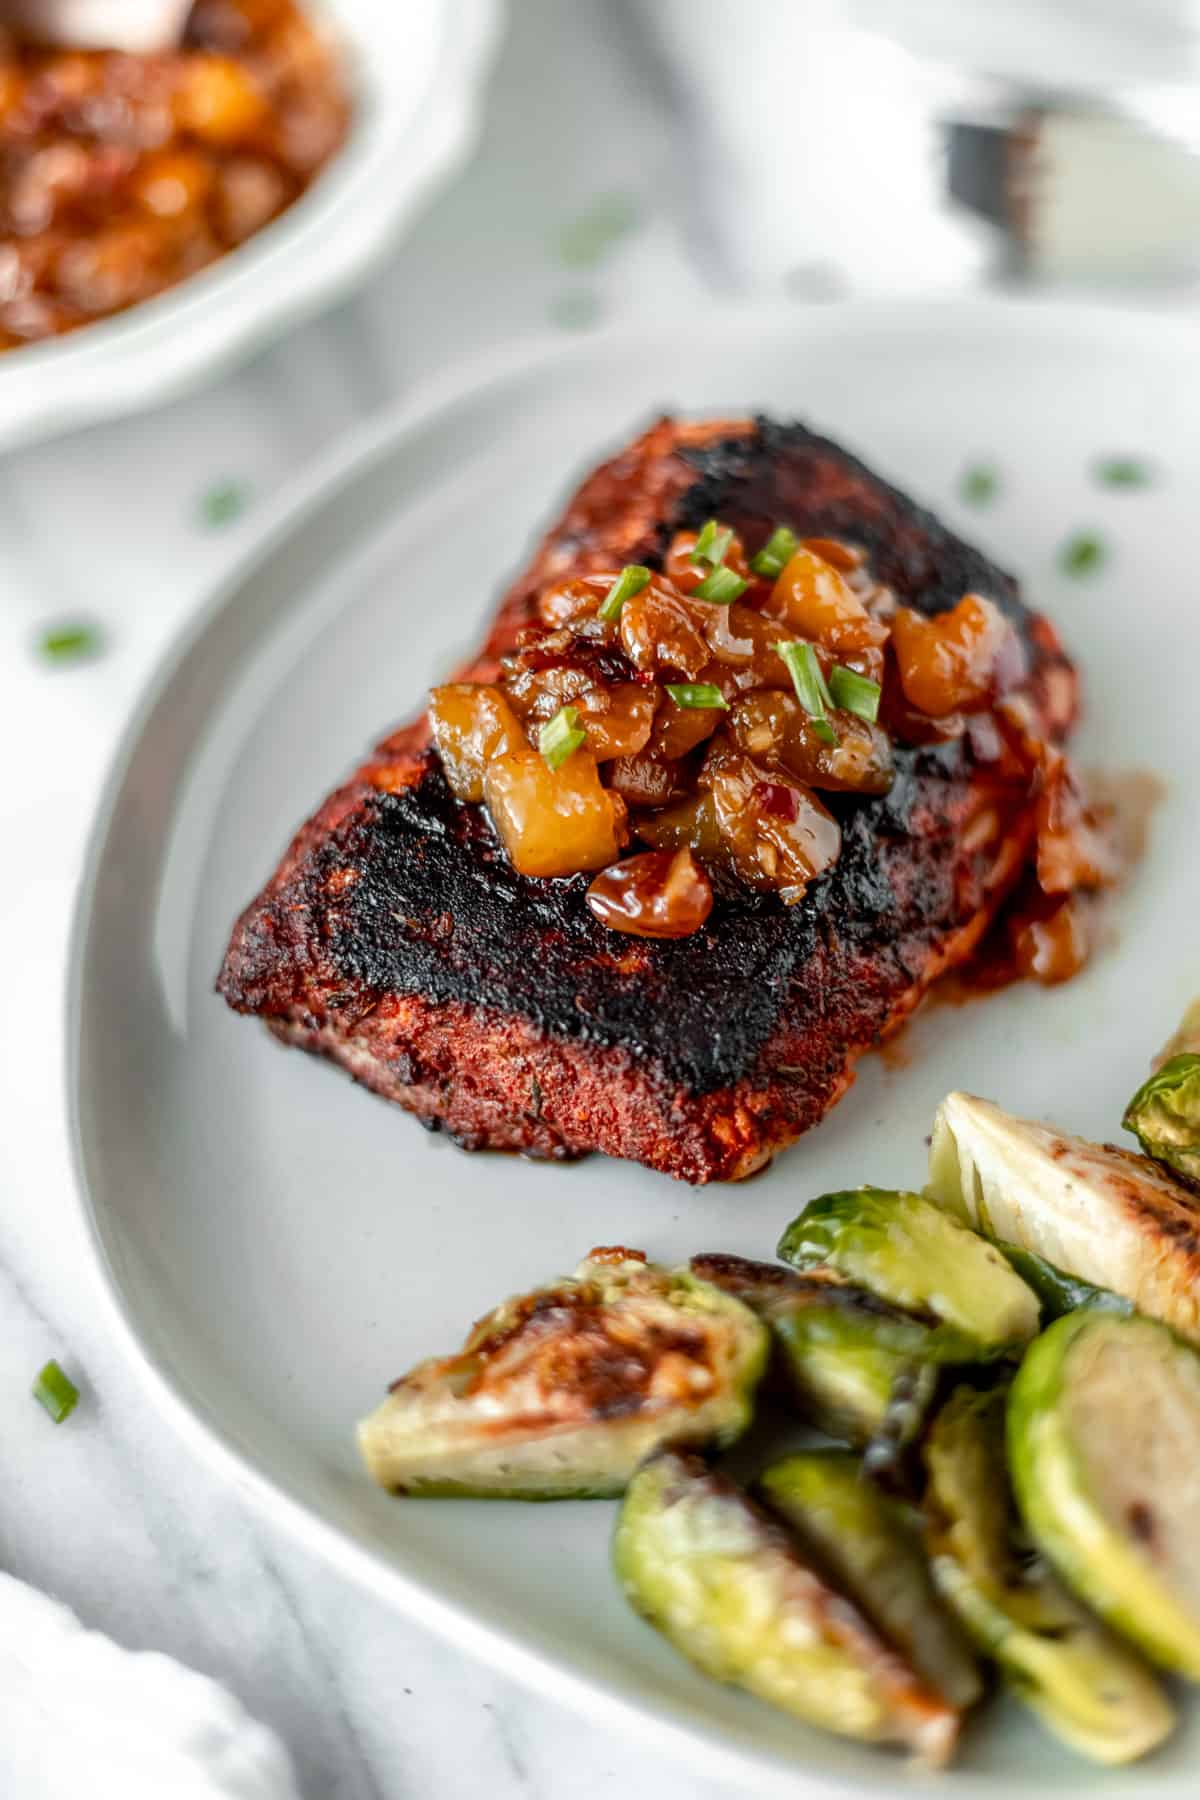 Peach chutney on top of blackened fish on a white plate with brussels sprouts.